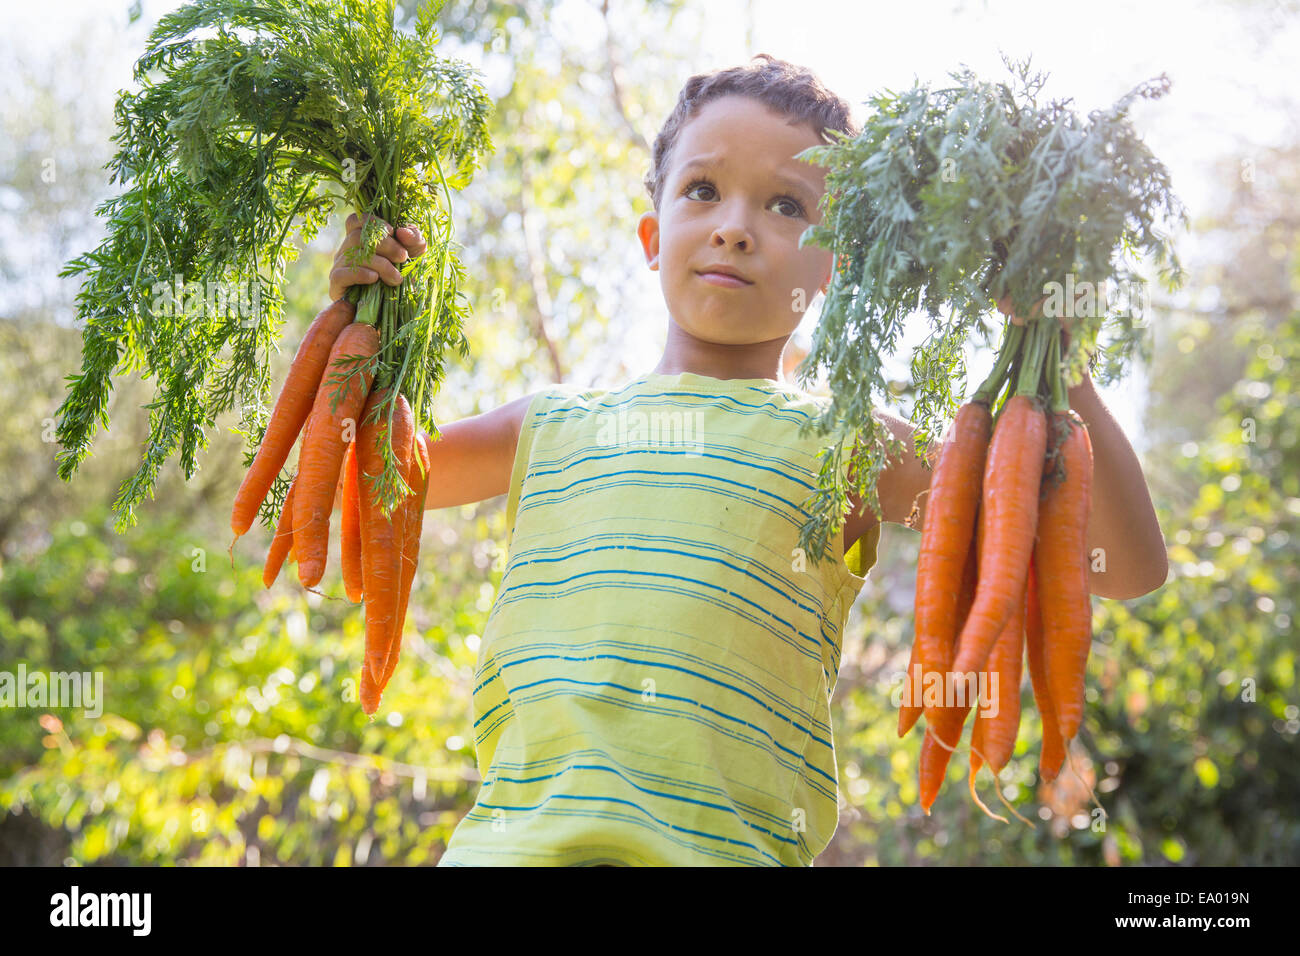 Portrait of boy in garden holding up bunches of carrots Stock Photo